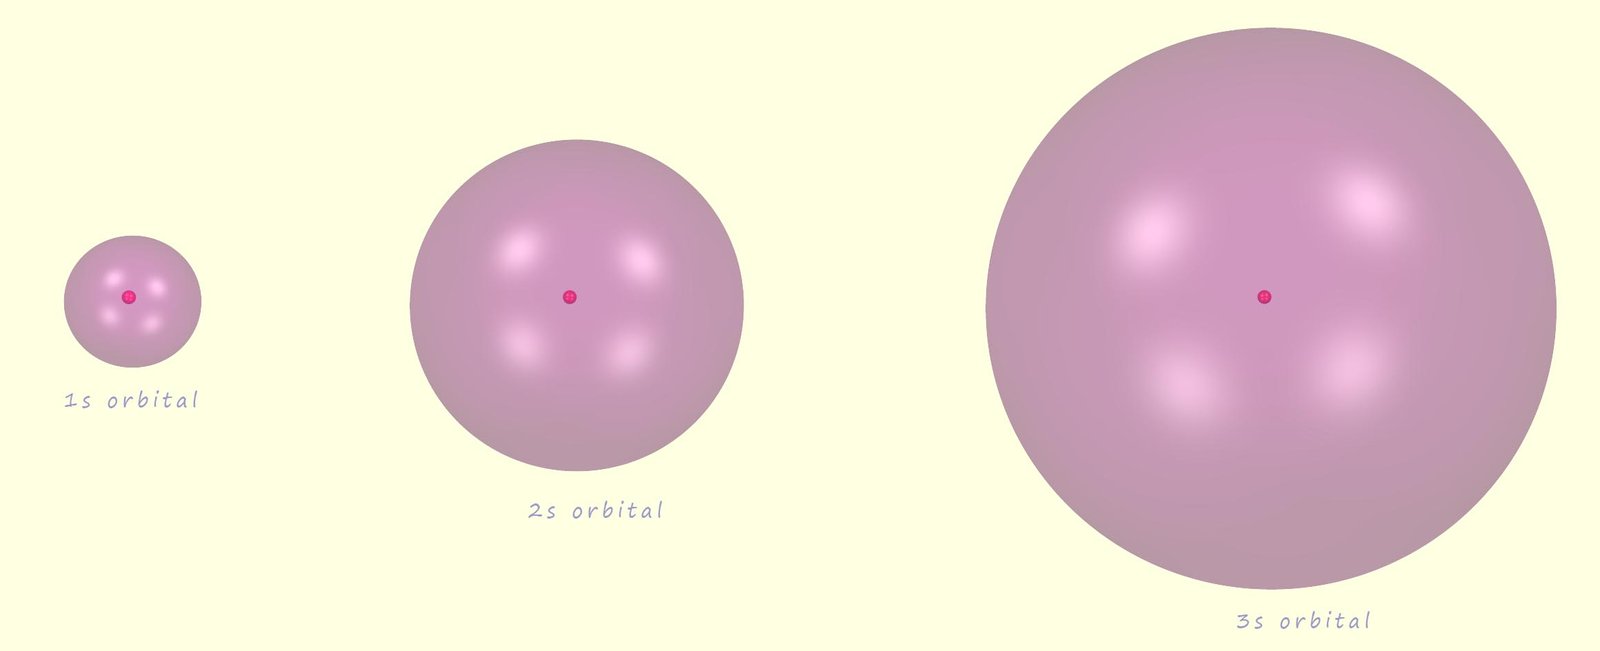  image to show the spherical shape of the 1s, 2s and 3s orbitals